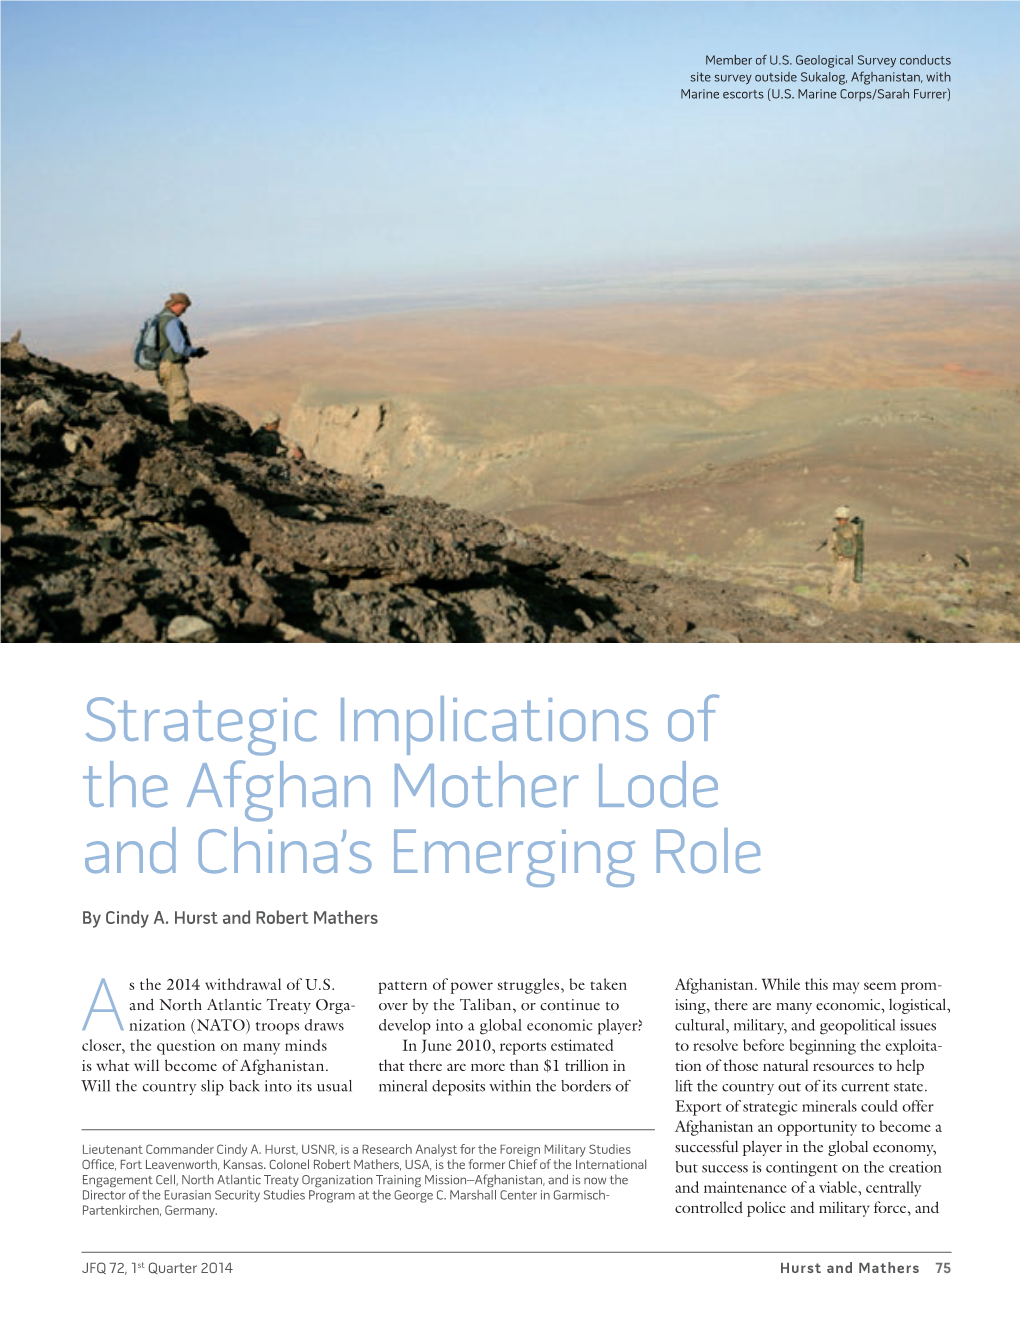 Strategic Implications of the Afghan Mother Lode and China's Emerging